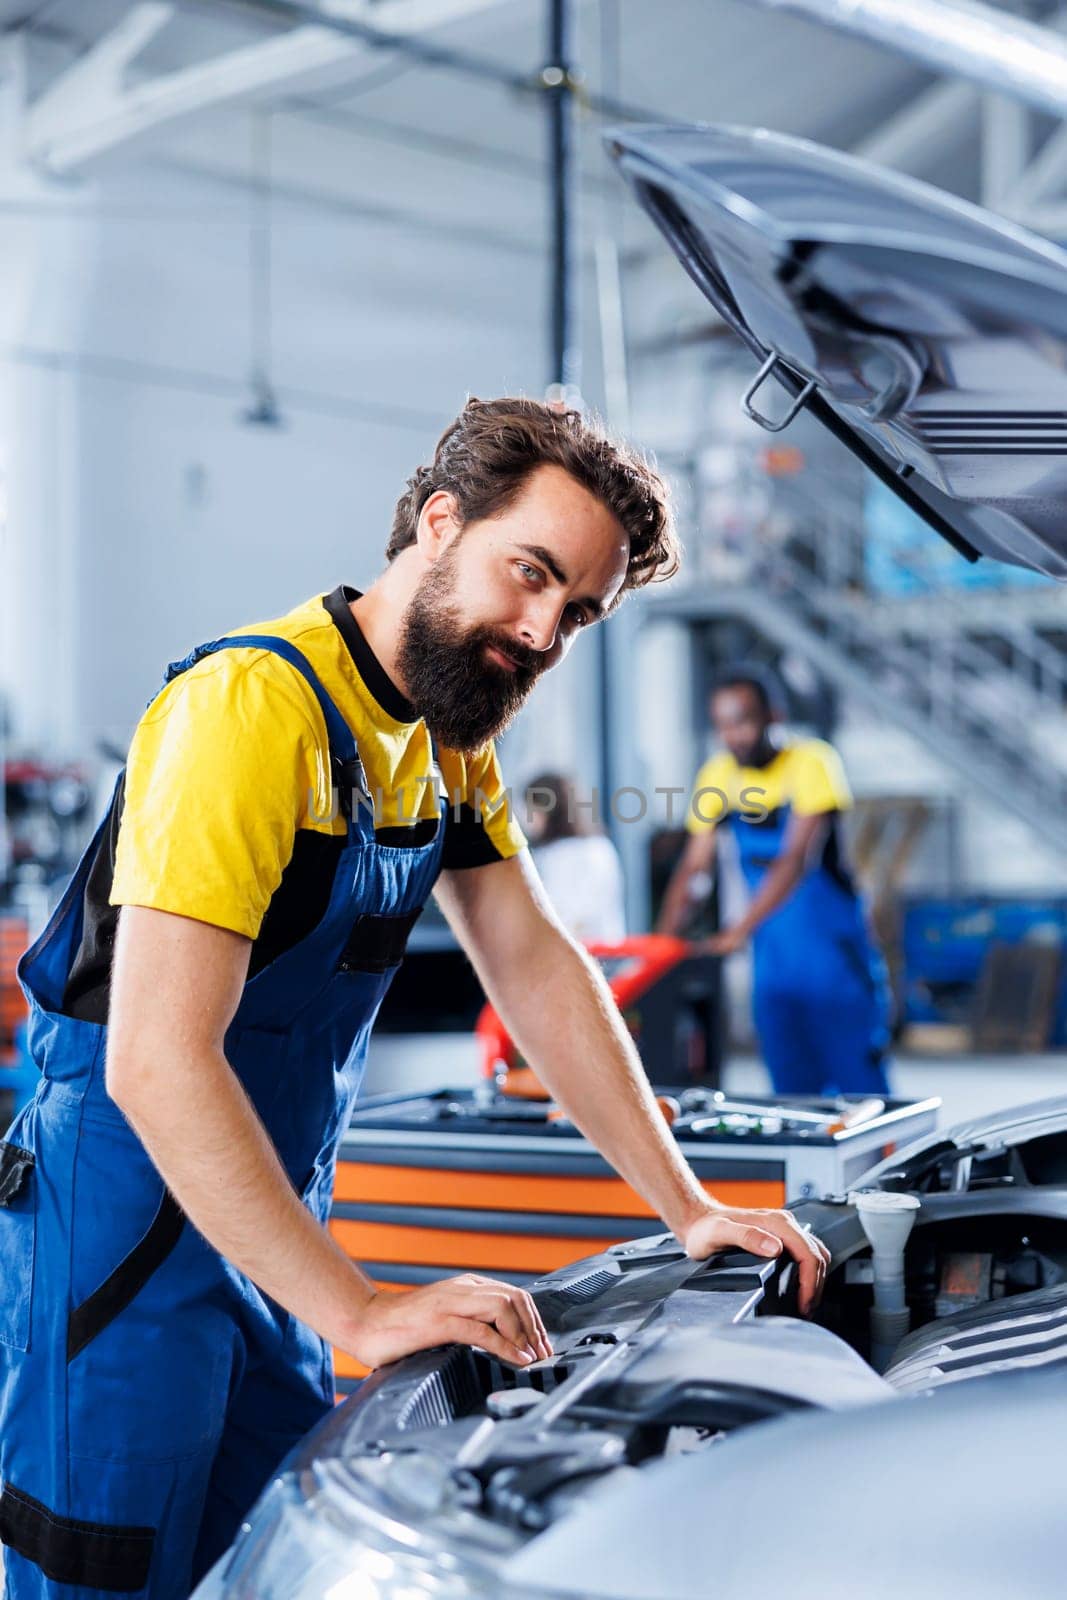 Portrait of car service mechanic examining broken engine using advanced mechanical tools to ensure optimal automotive performance and safety. Happy garage employee conducts annual vehicle checkup